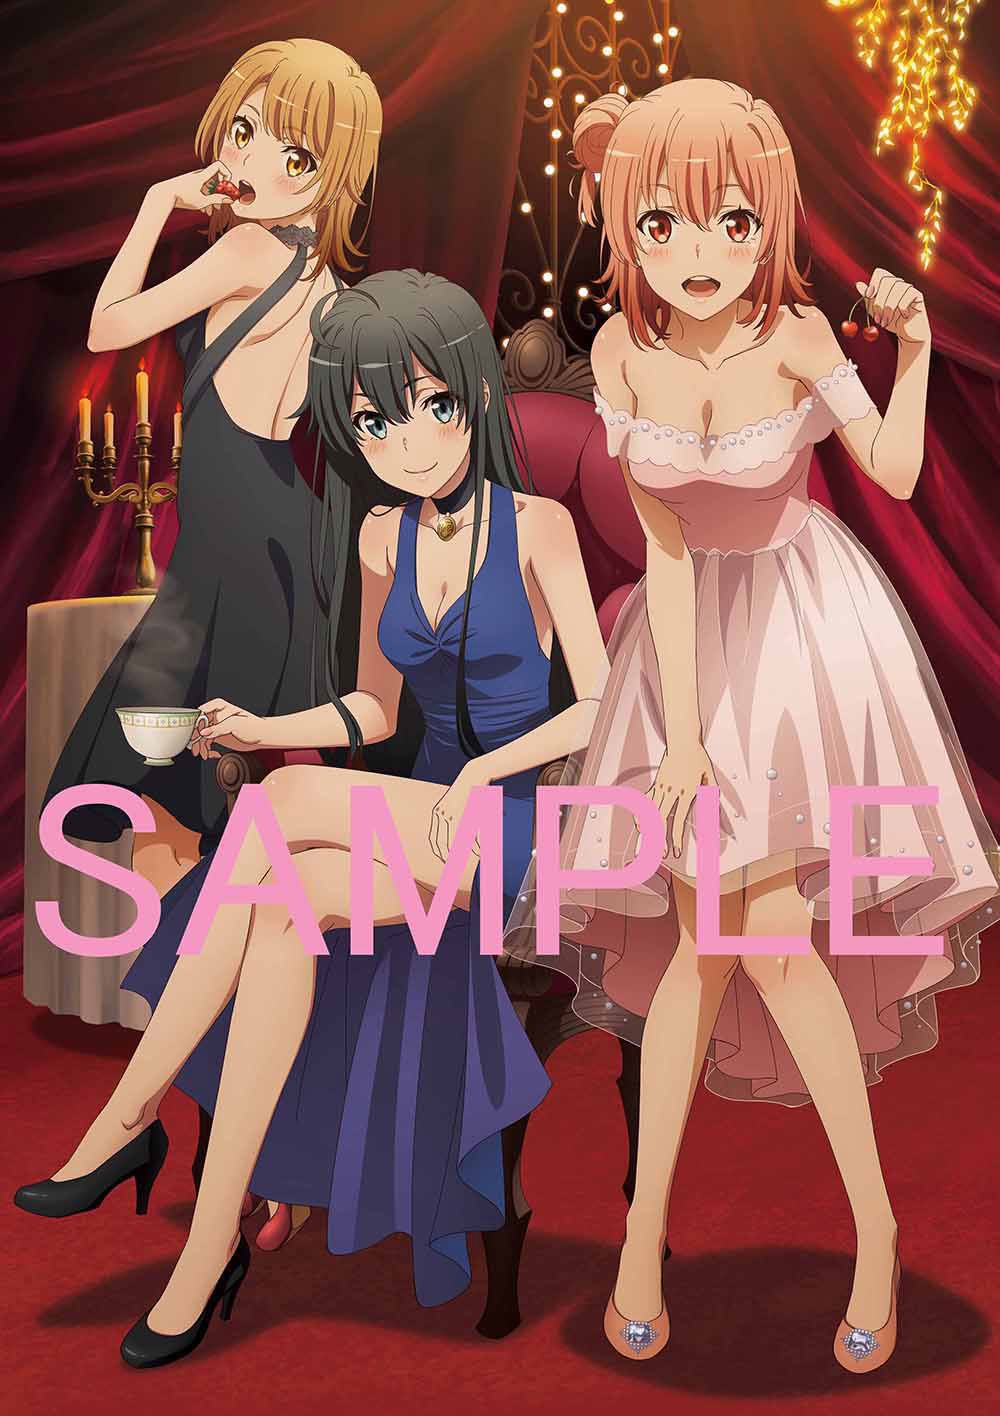 Anime [I Gyle] erotic illustrations such as swimsuits and dresses of in BD / DVD store benefits of the third phase 7